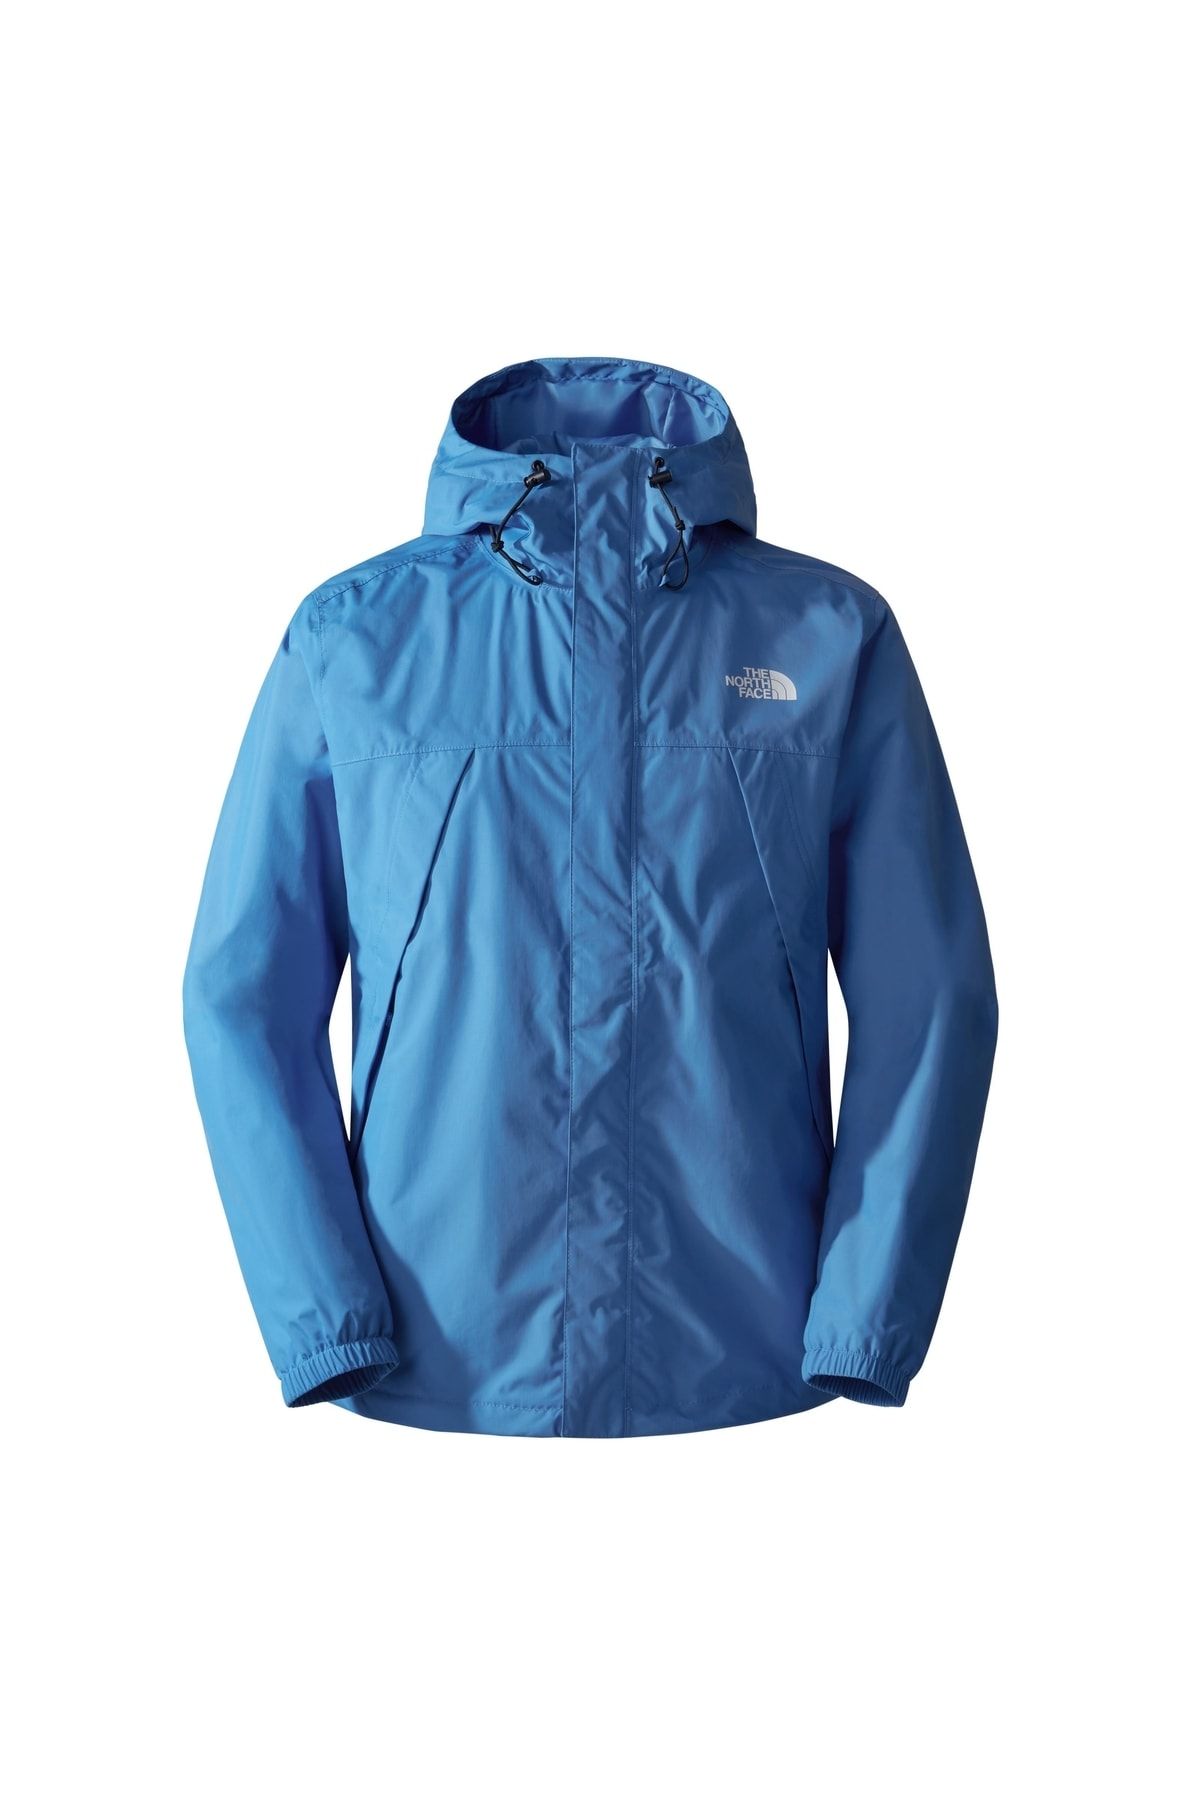 The North Face M Antora Jacket Nf0a7qeylv61